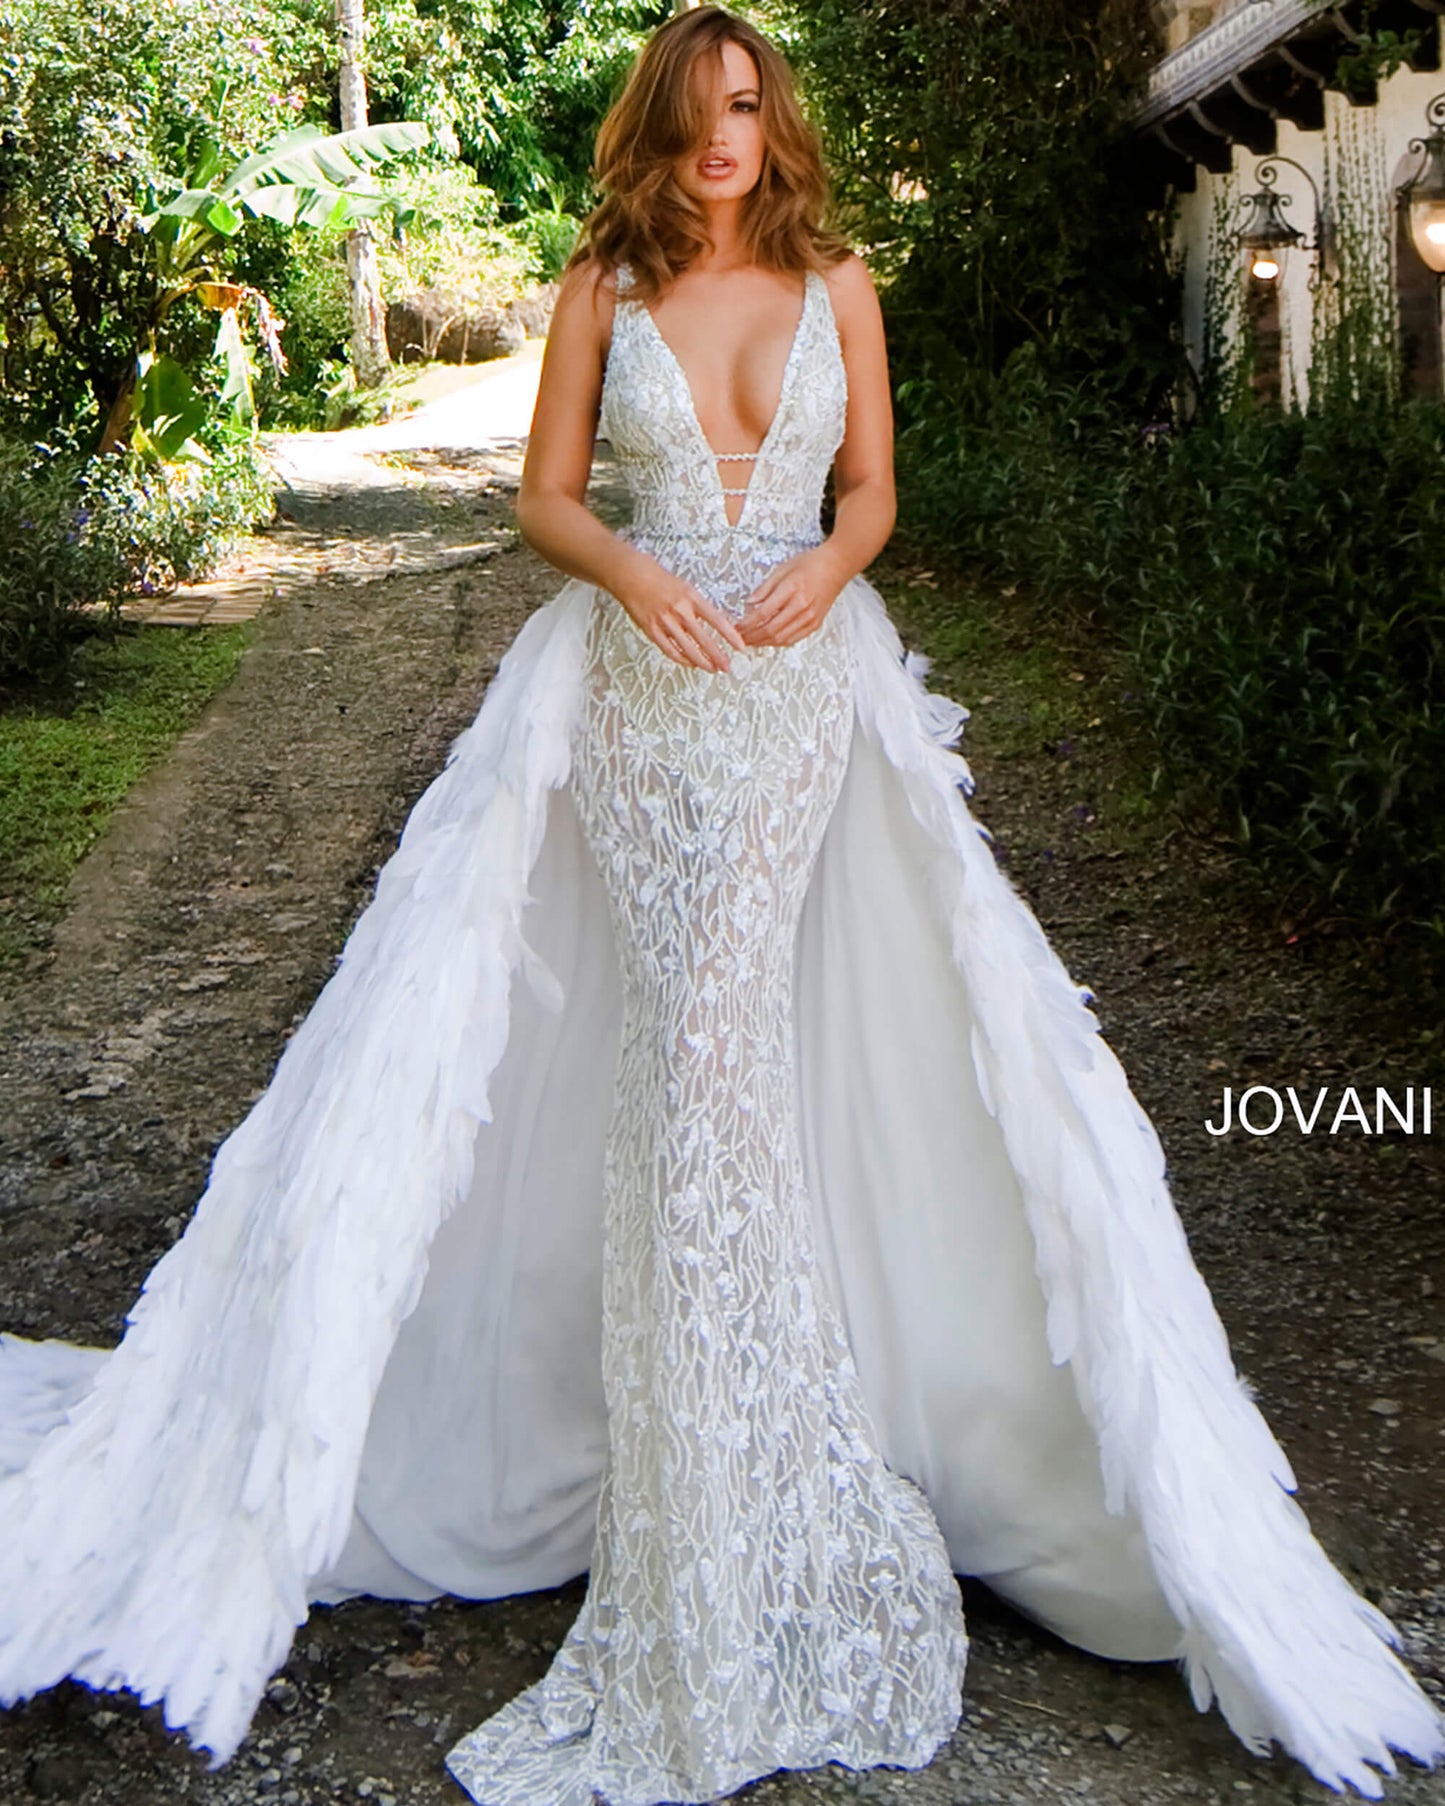 Jovani S62942 62942 Couture Feather Wedding Dress Pageant Gown Overskirt Over Skirt Bridal Train Glass Slipper Formals